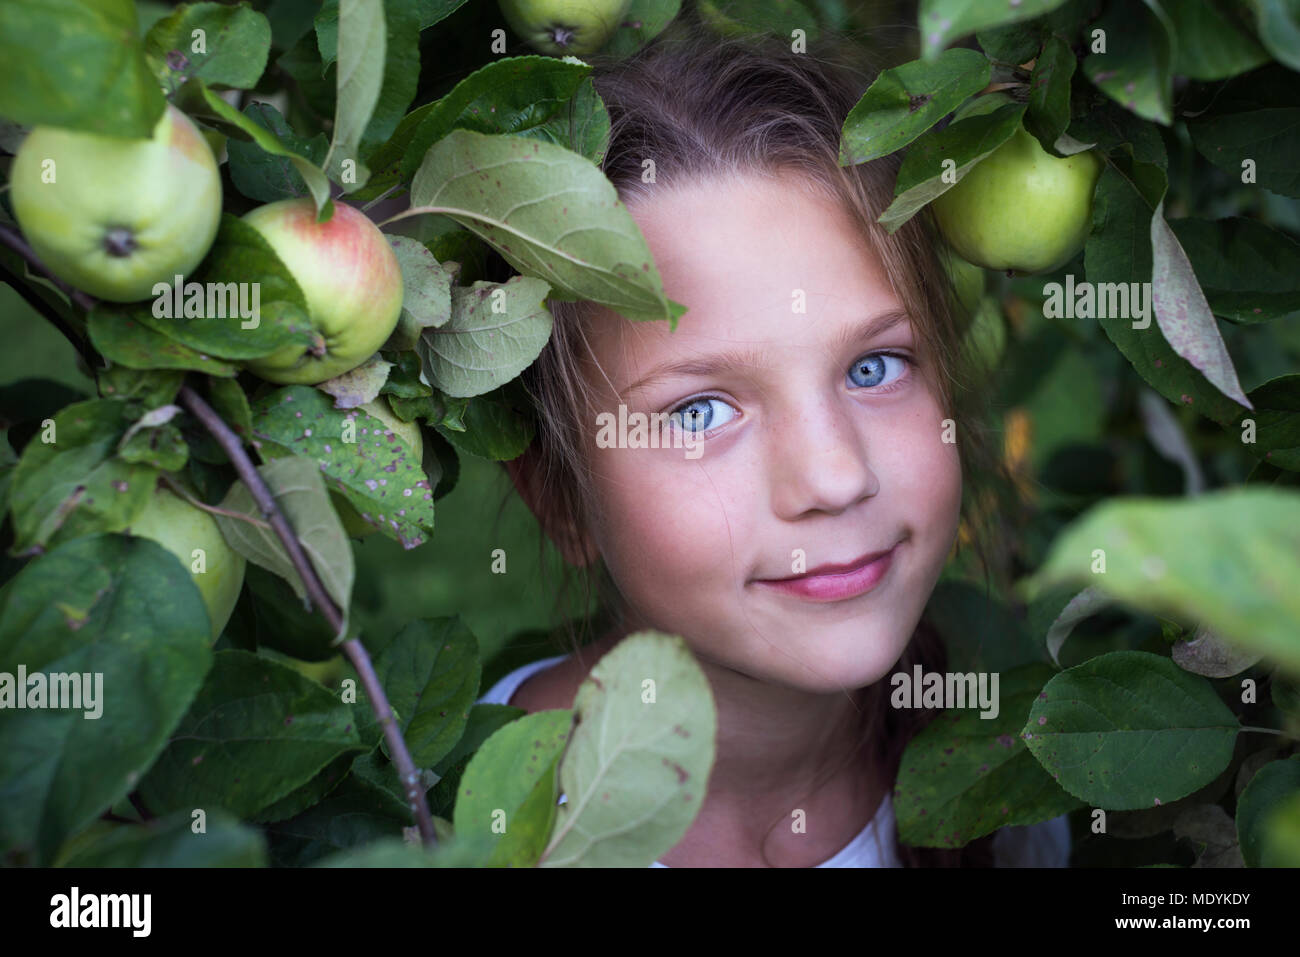 child girl smiling portrait between apple tree branches by summer Stock Photo